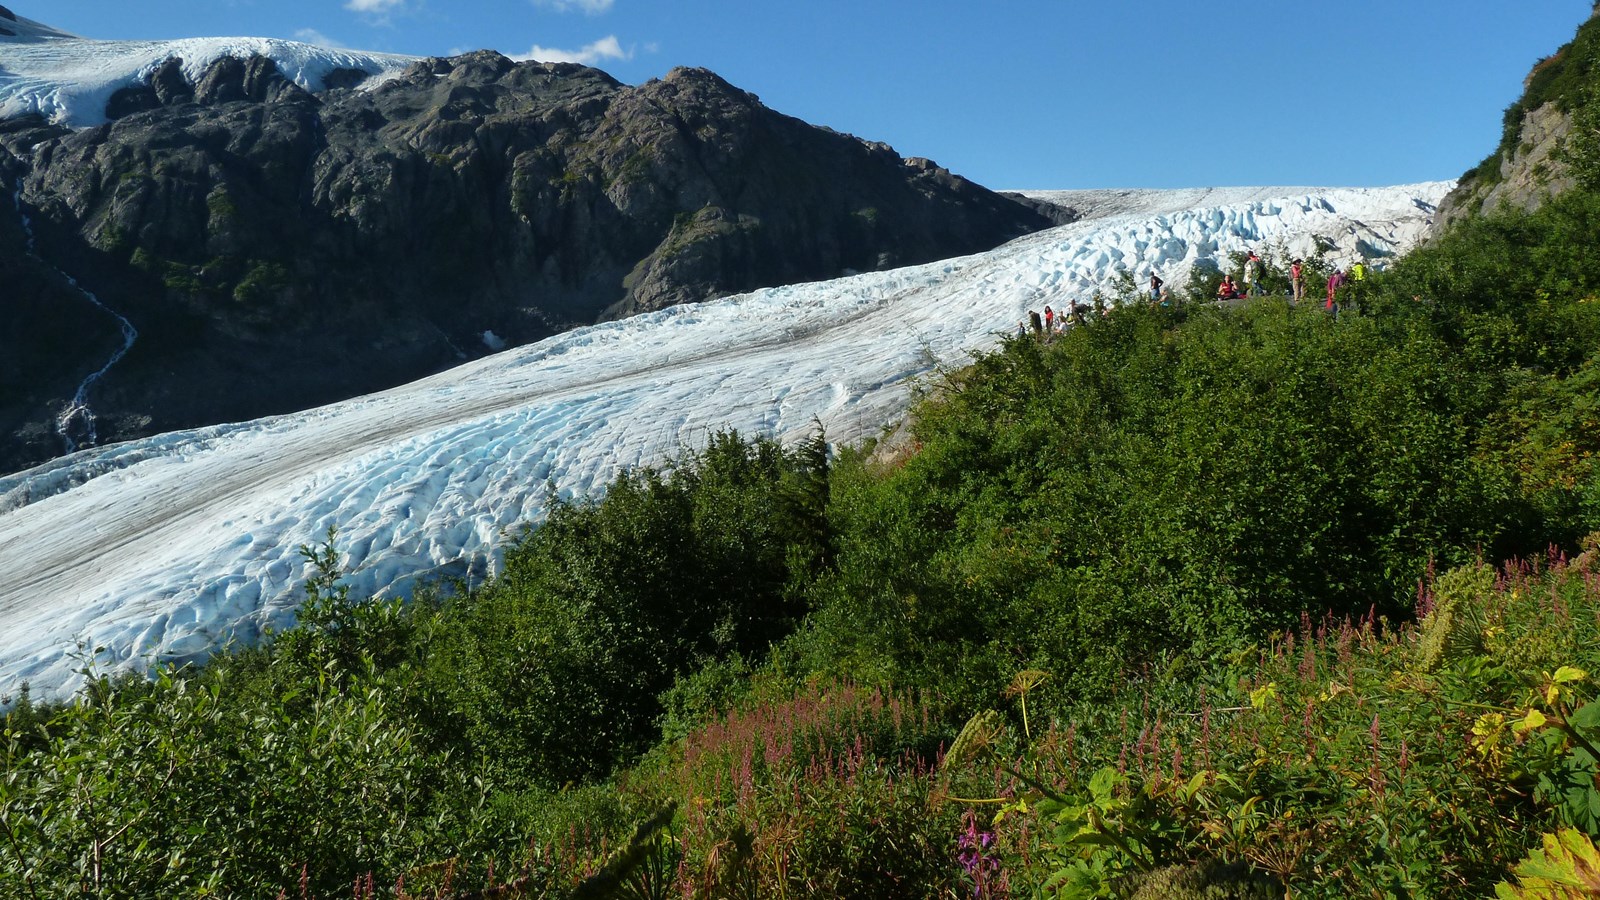 Small plants and shrubs in the front of the image. A white glacier is behind the shrubs flowing down